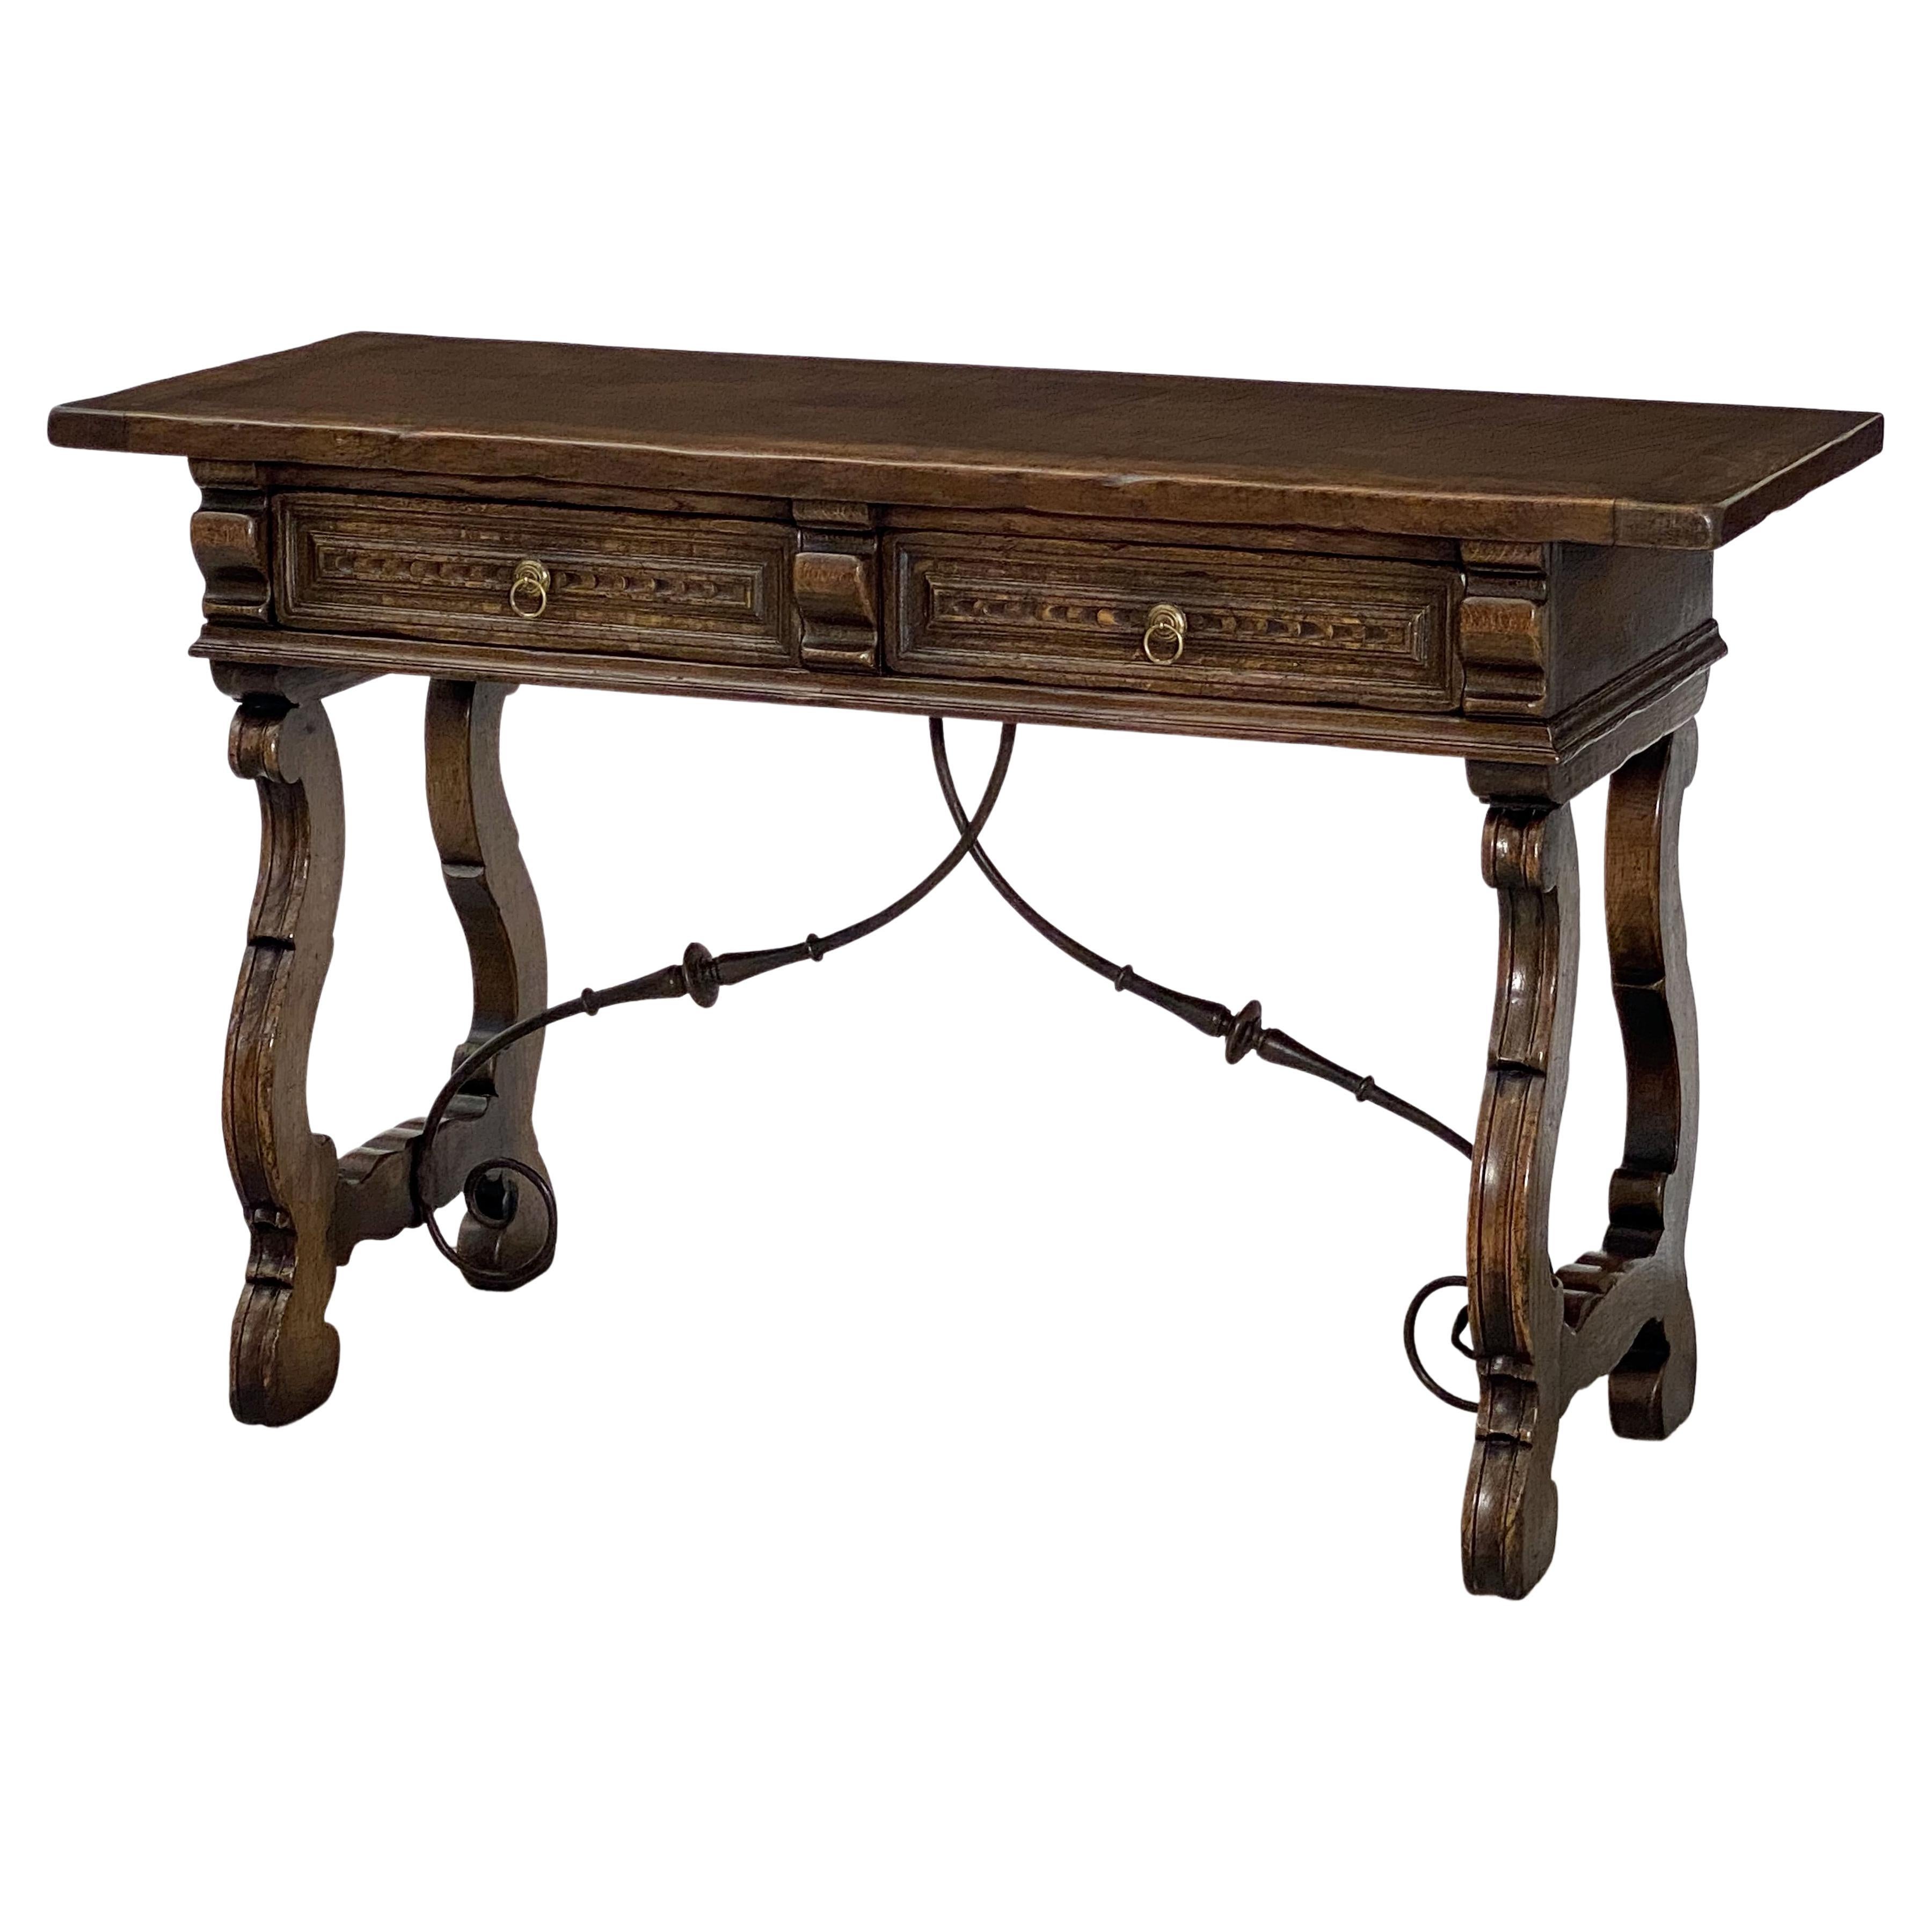 Spanish Console Table of Oak and Wrought Iron